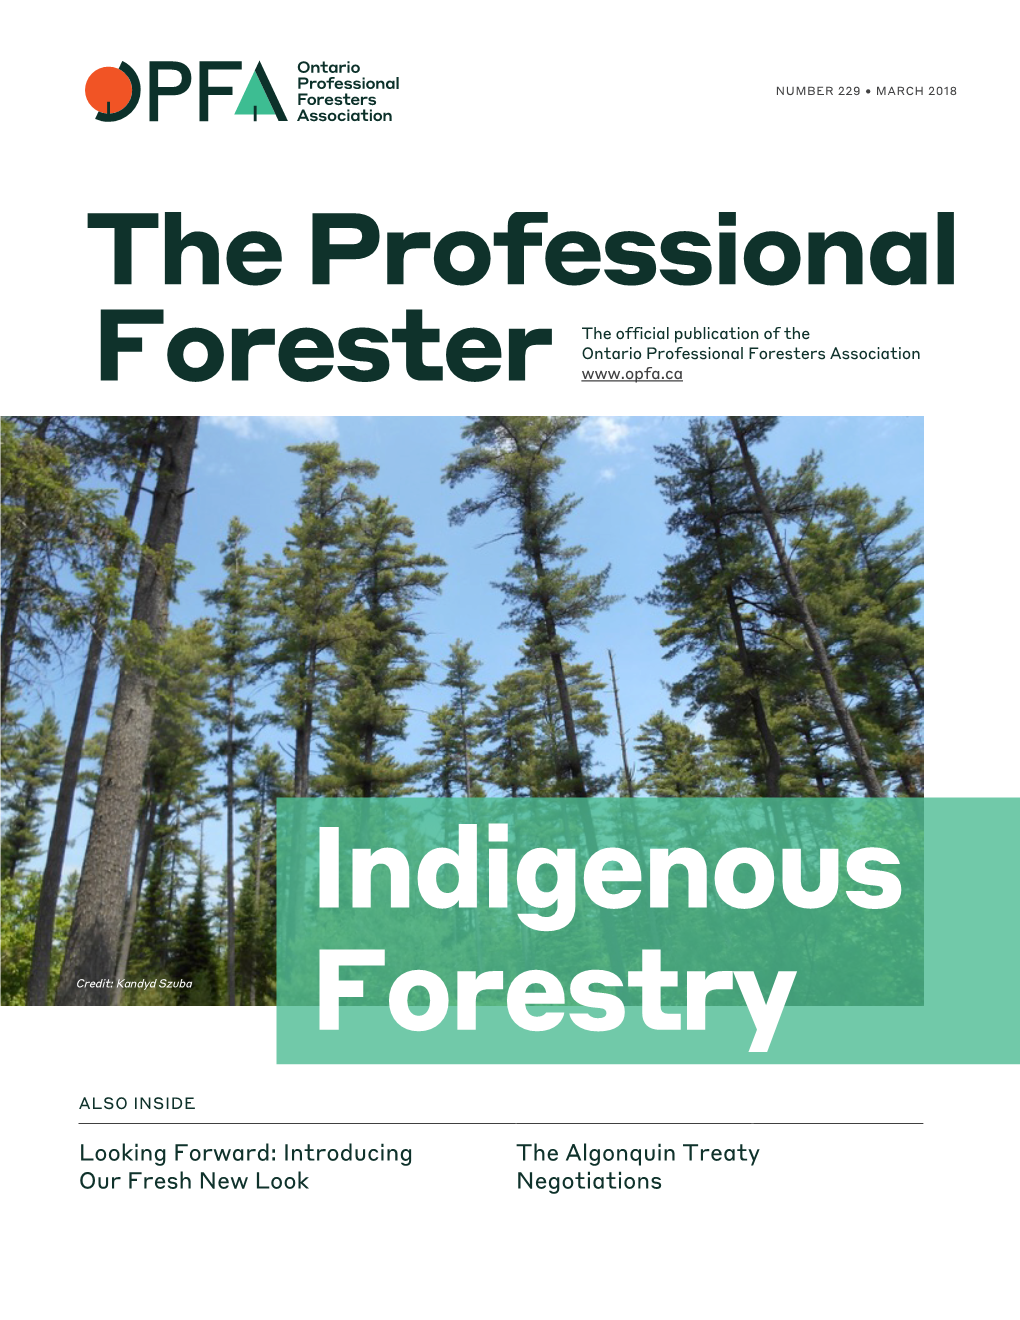 Indigenous Forestry Program (IFP) As Culture